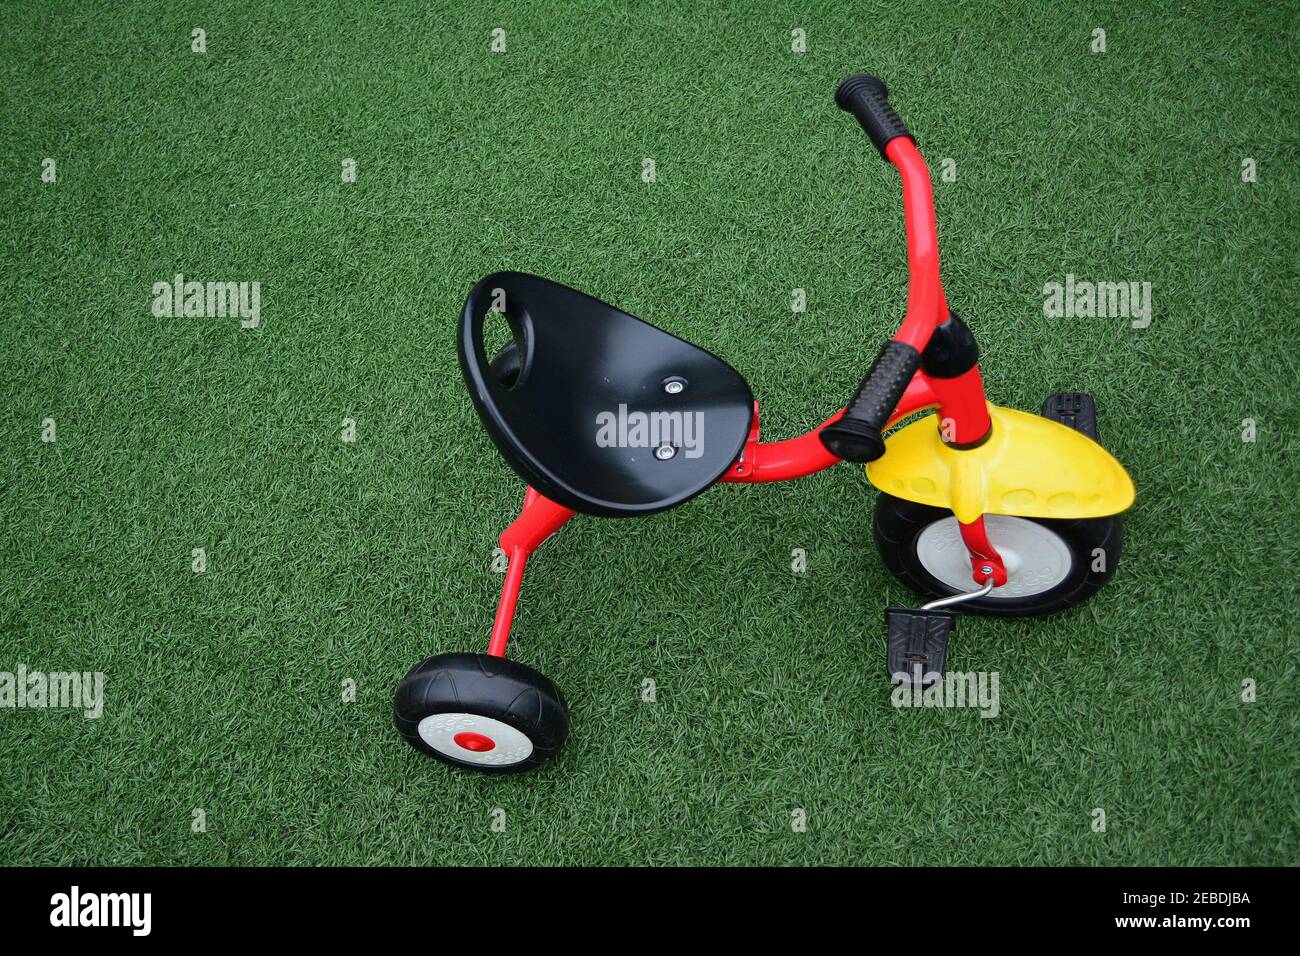 Red tricycle with a yellow mudguard on artificial grassready to ride Stock Photo